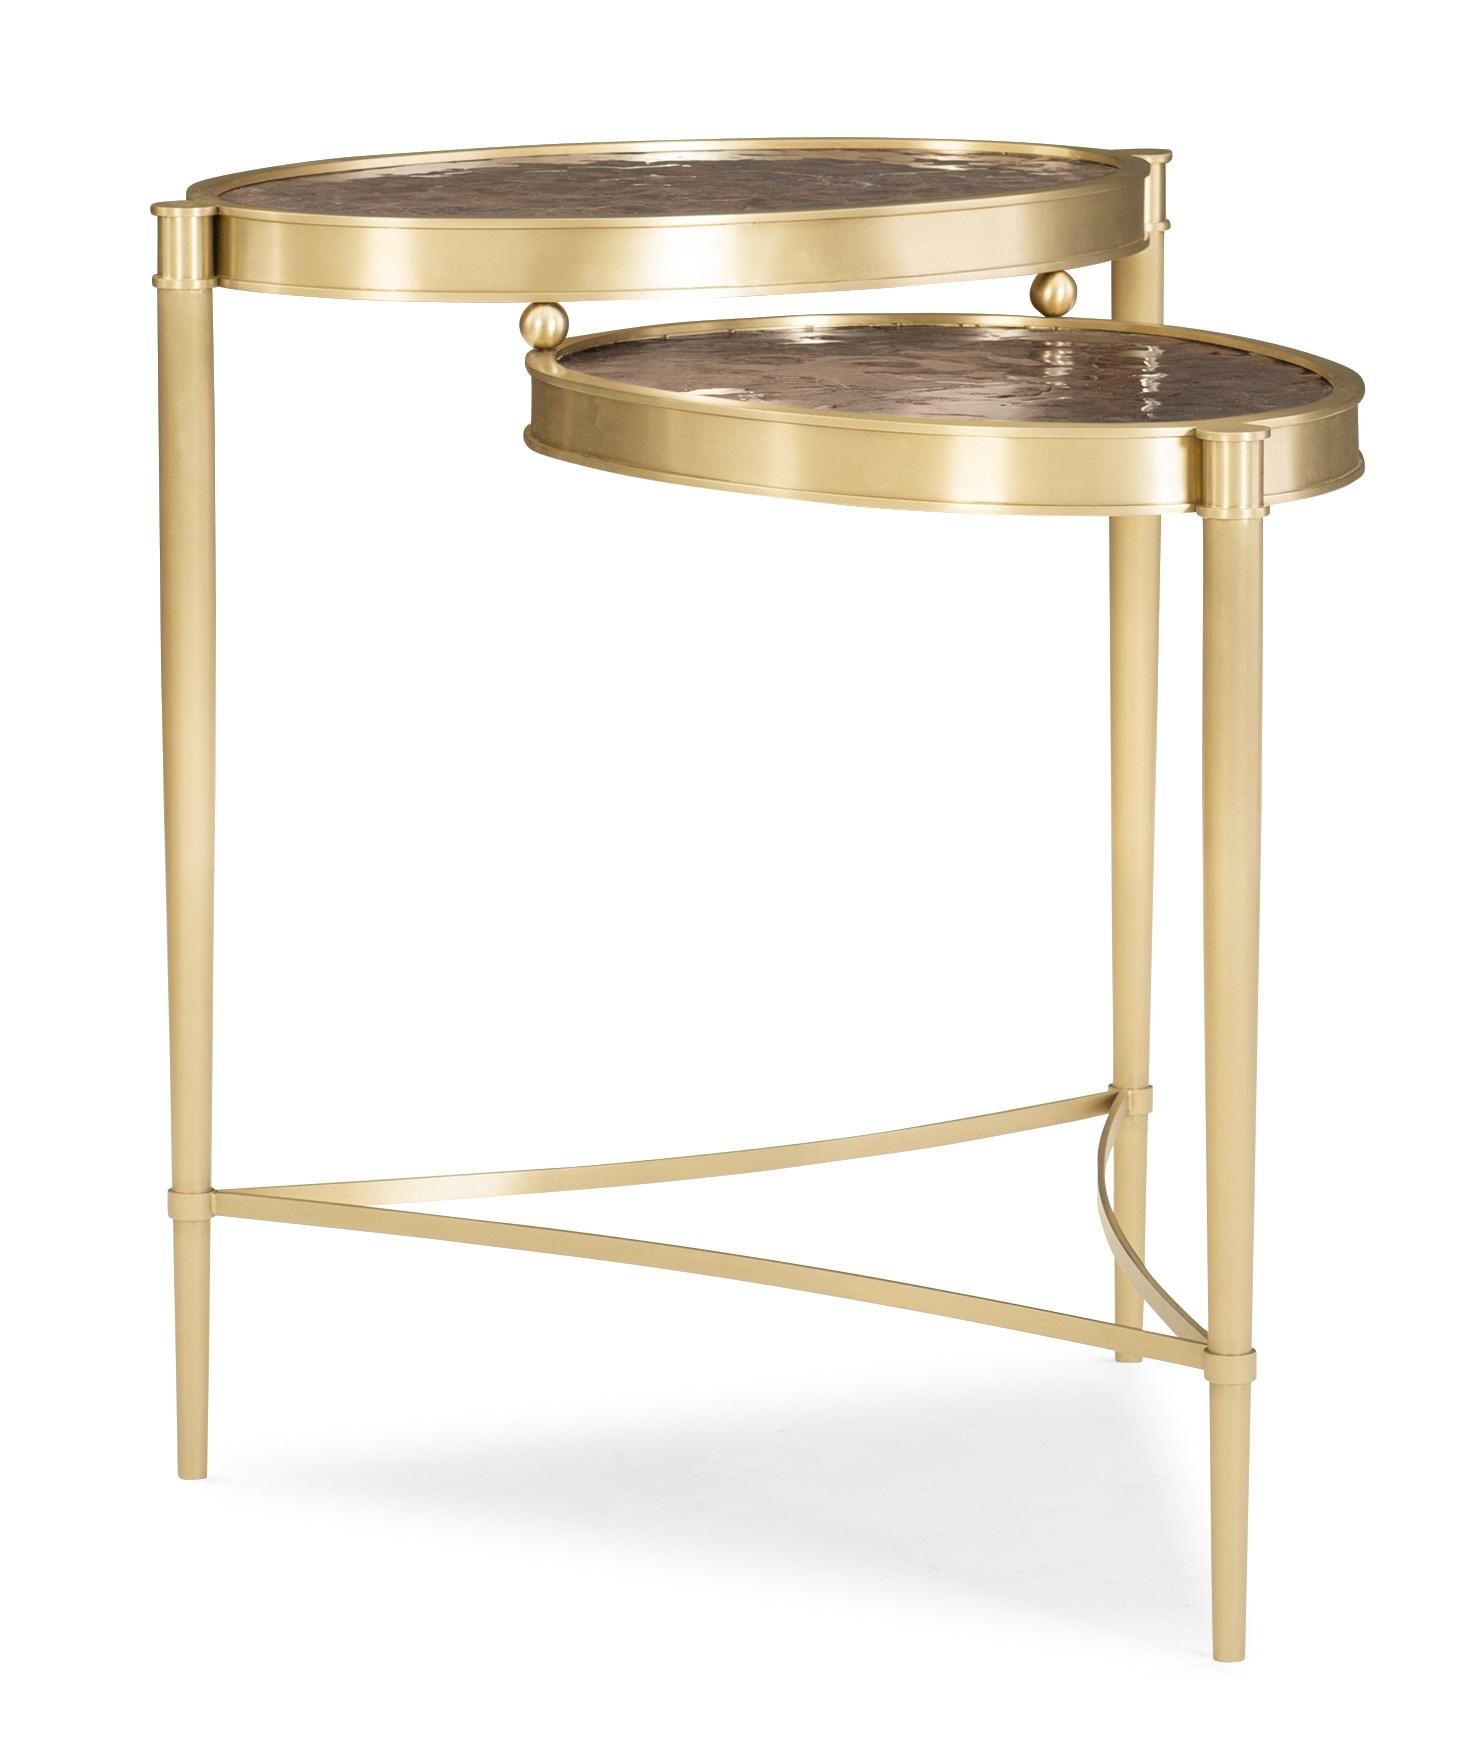 Contemporary End Table TIERED UP CLA-018-4123 in Metallic, Gold 